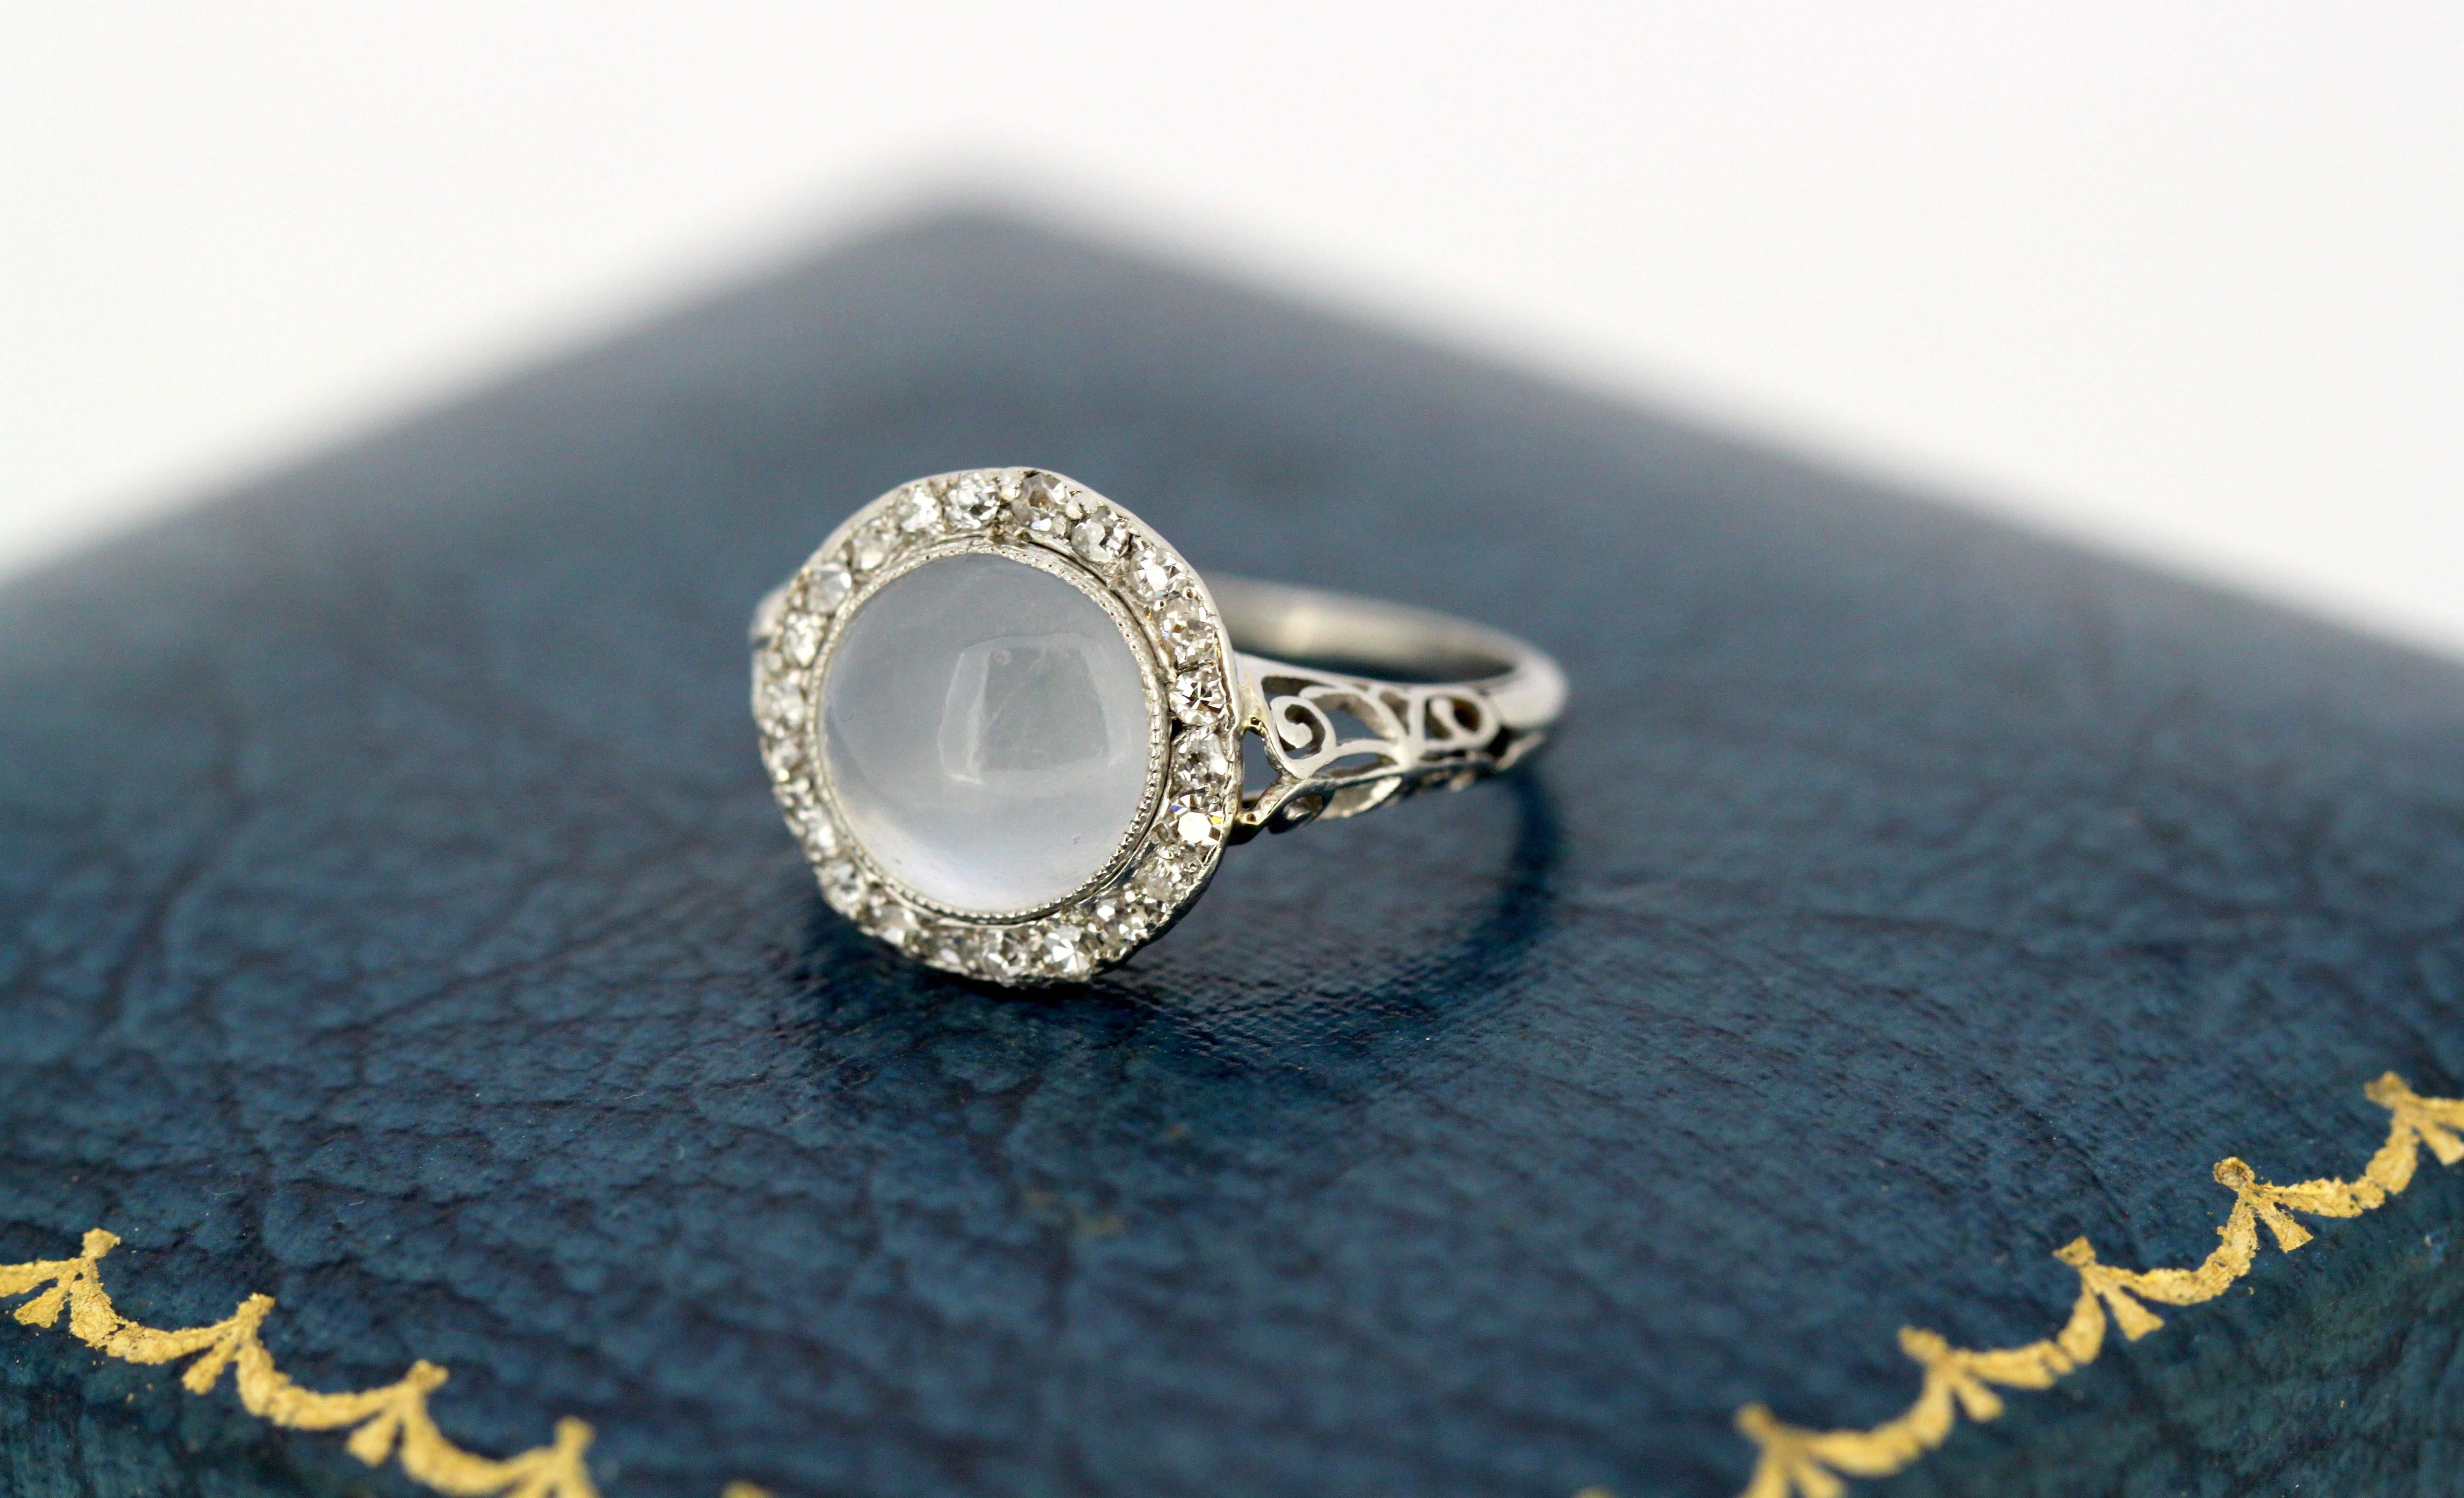 Antique Art deco 18kt white gold ladies ring with natural moonstone and diamonds.
Made in France Circa 1910.
Hallmarked with eagles head, French for 18kt gold.

Dimensions -
Size: (UK) = L (US) = 6 (EU) = 51 1/2
Weight: 4 g
Ring Size : 2.4 x 2 x 1.3